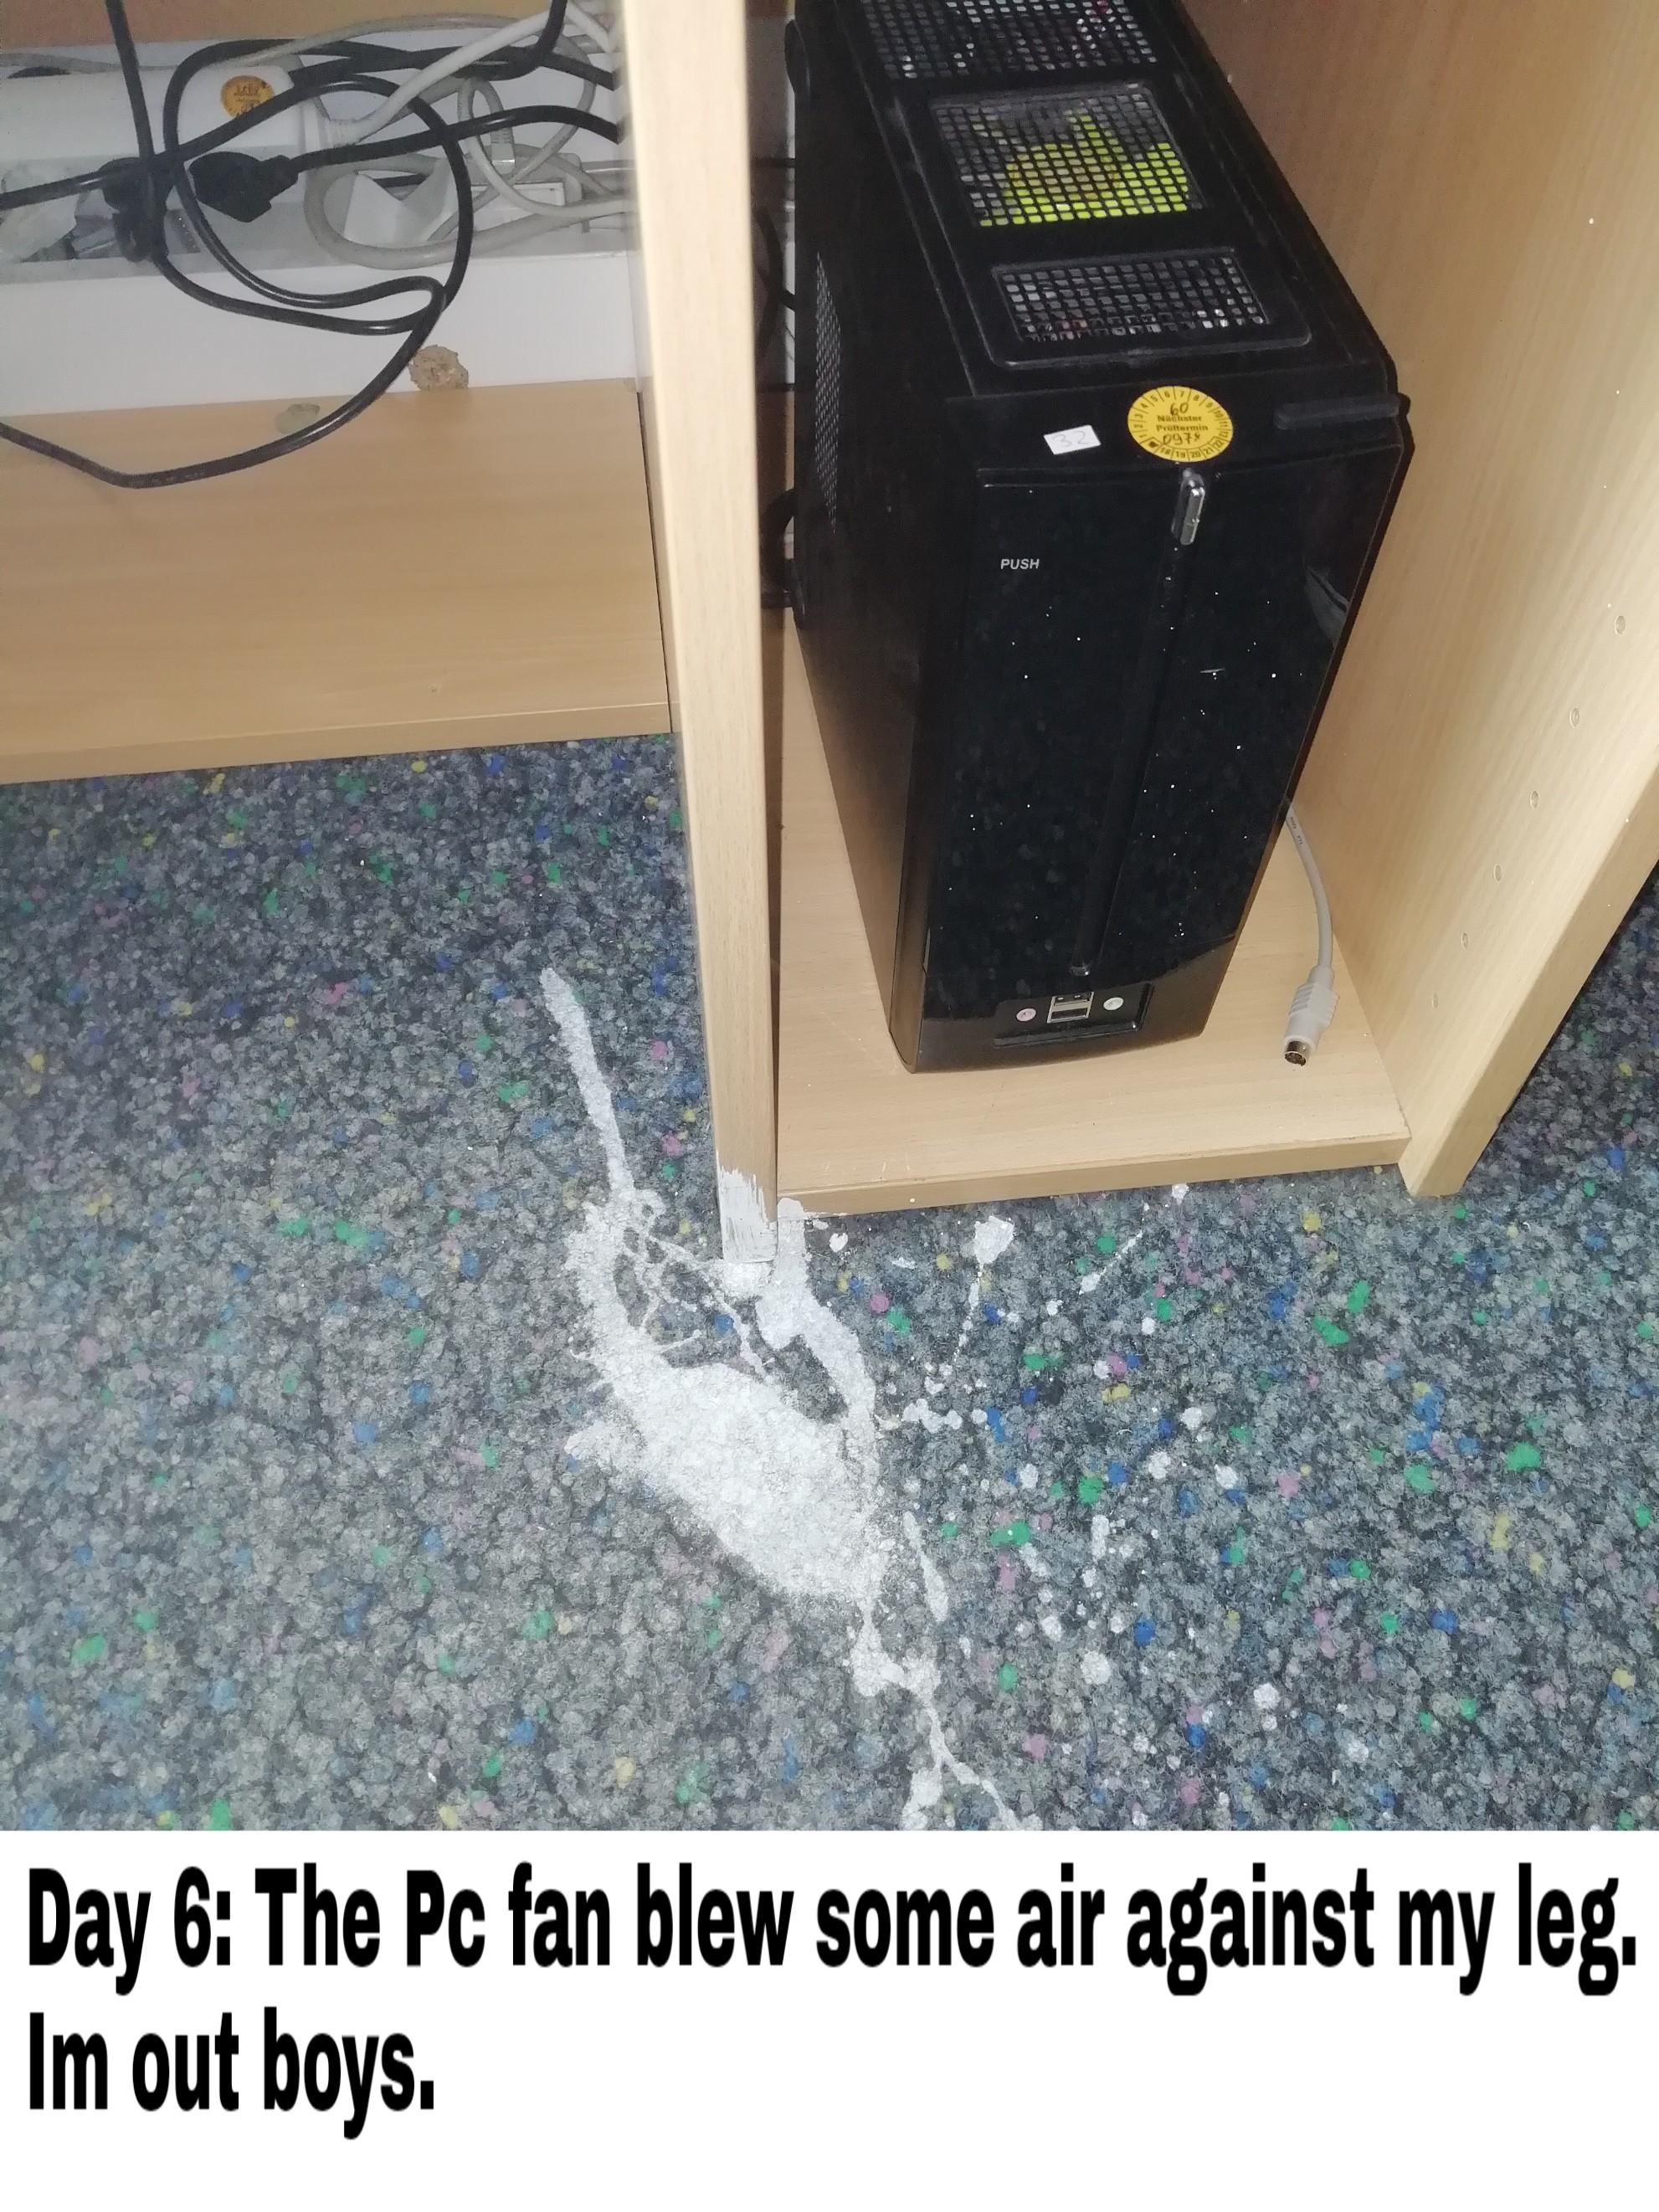 floor - Day 6 The Pc fan blew some air against my leg. Im out boys.